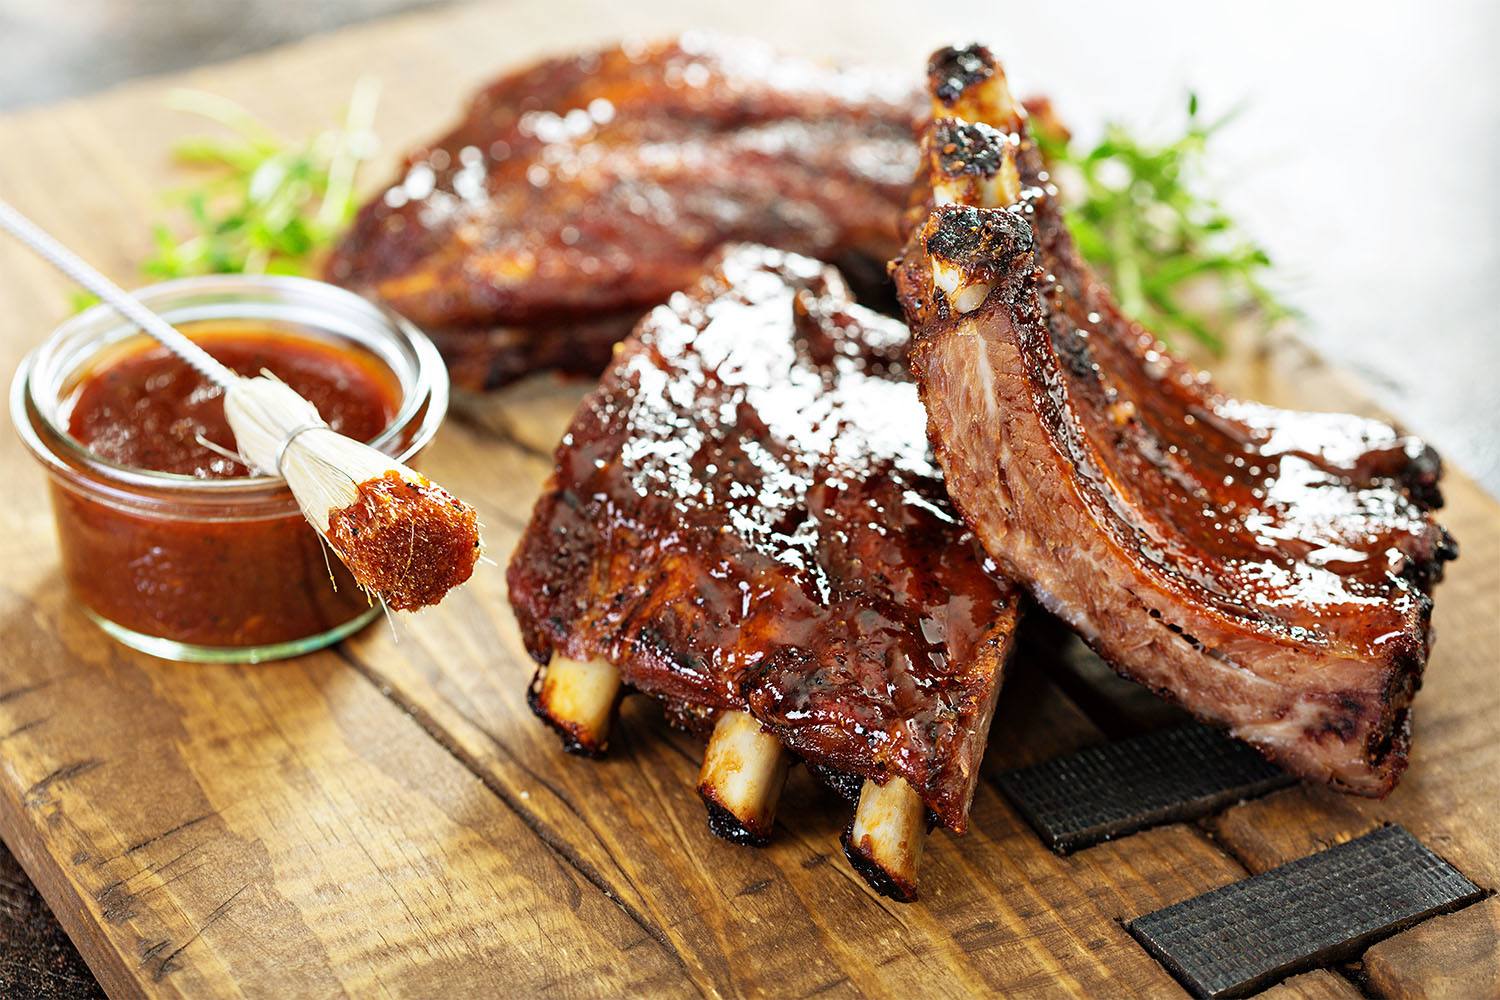 A Pork Ribs Recipe with a Chinese Twist